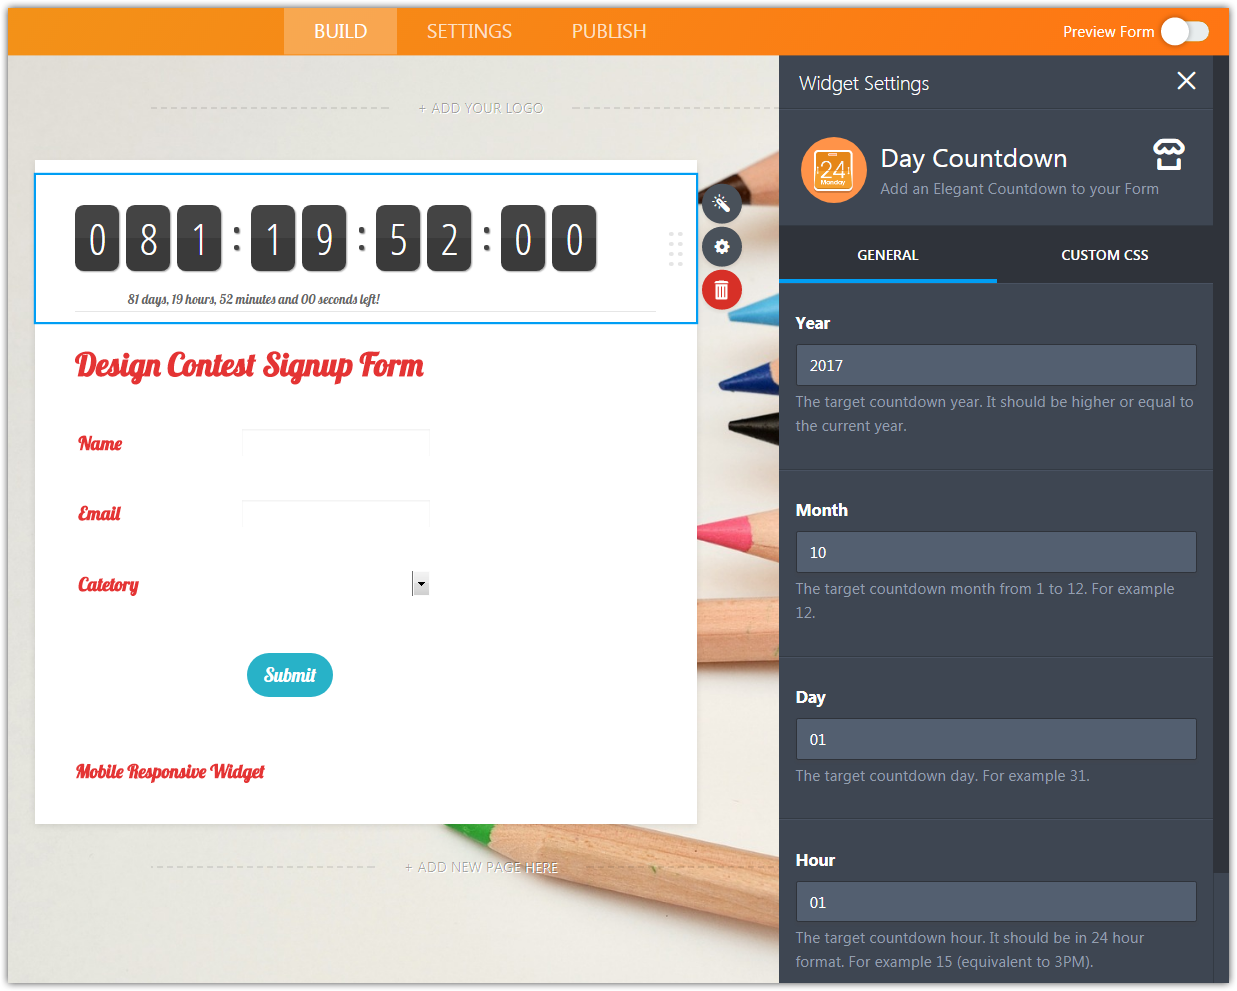 How to show countdown to event on form Image 1 Screenshot 20